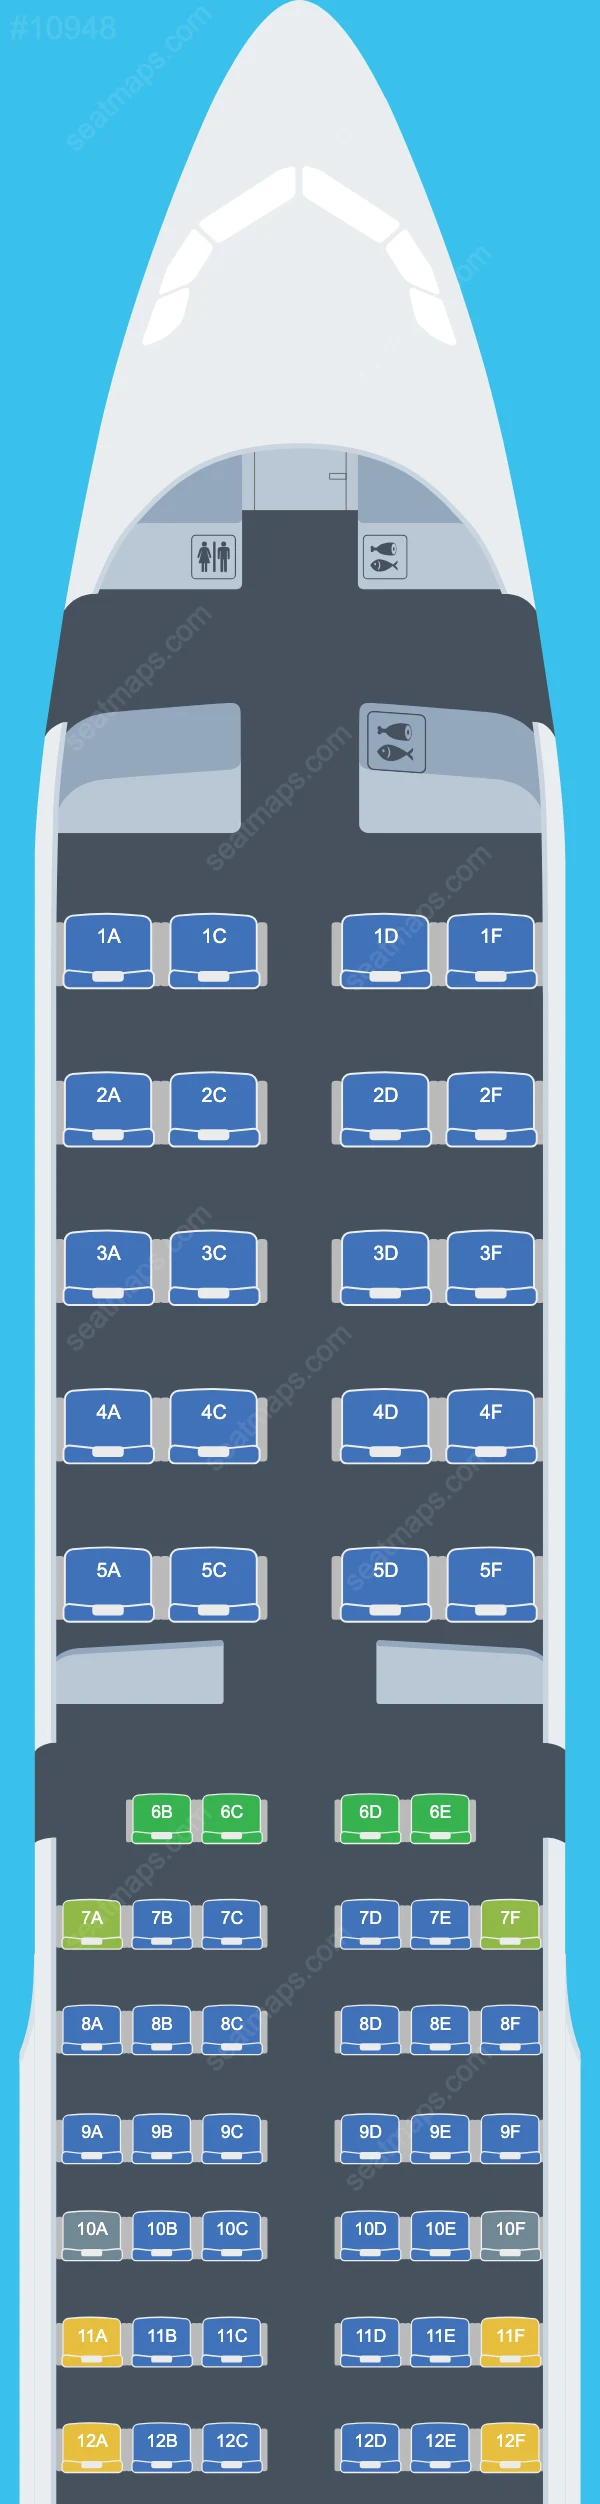 Turkish Airlines Airbus A321 Seat Maps A321-200 V.4